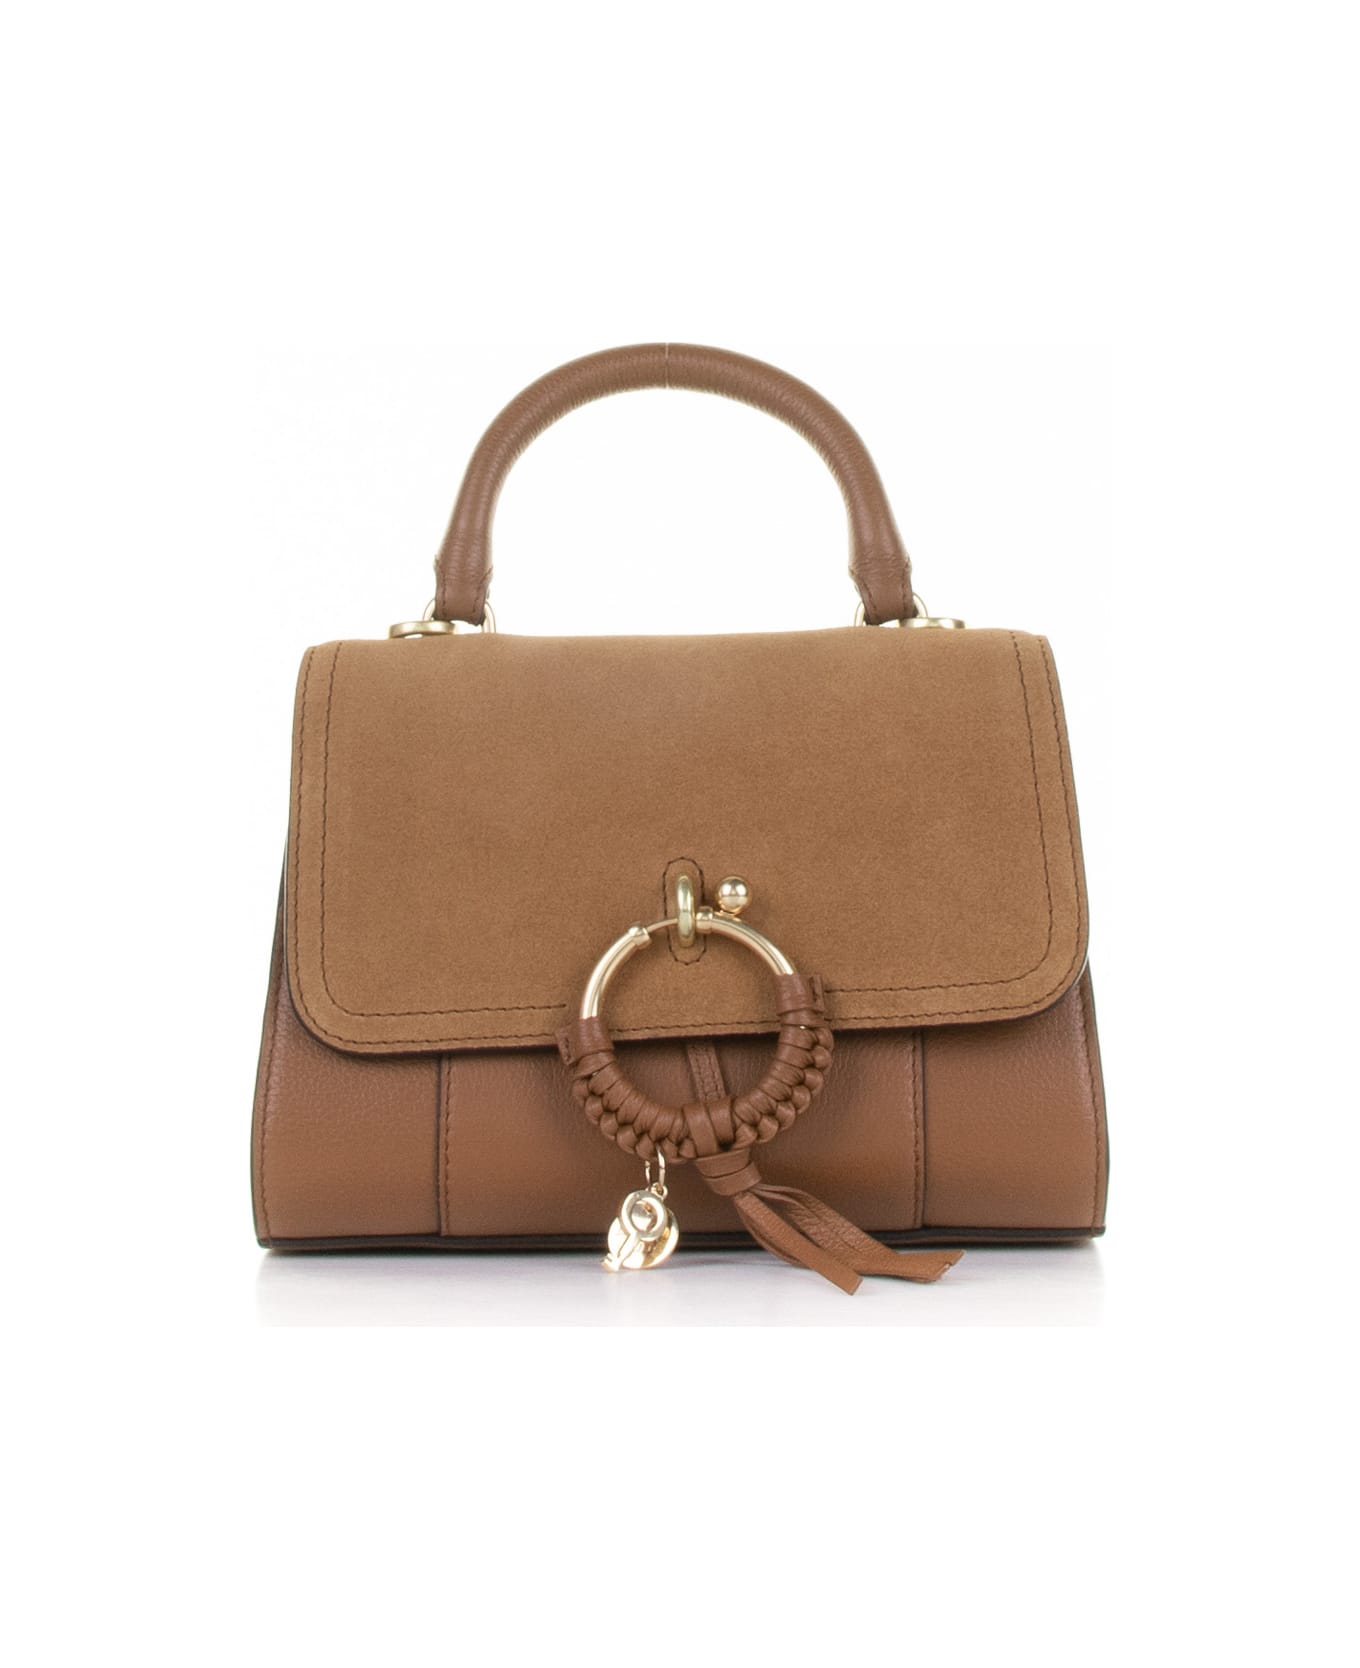 See by Chloé Tote - Caramello トートバッグ